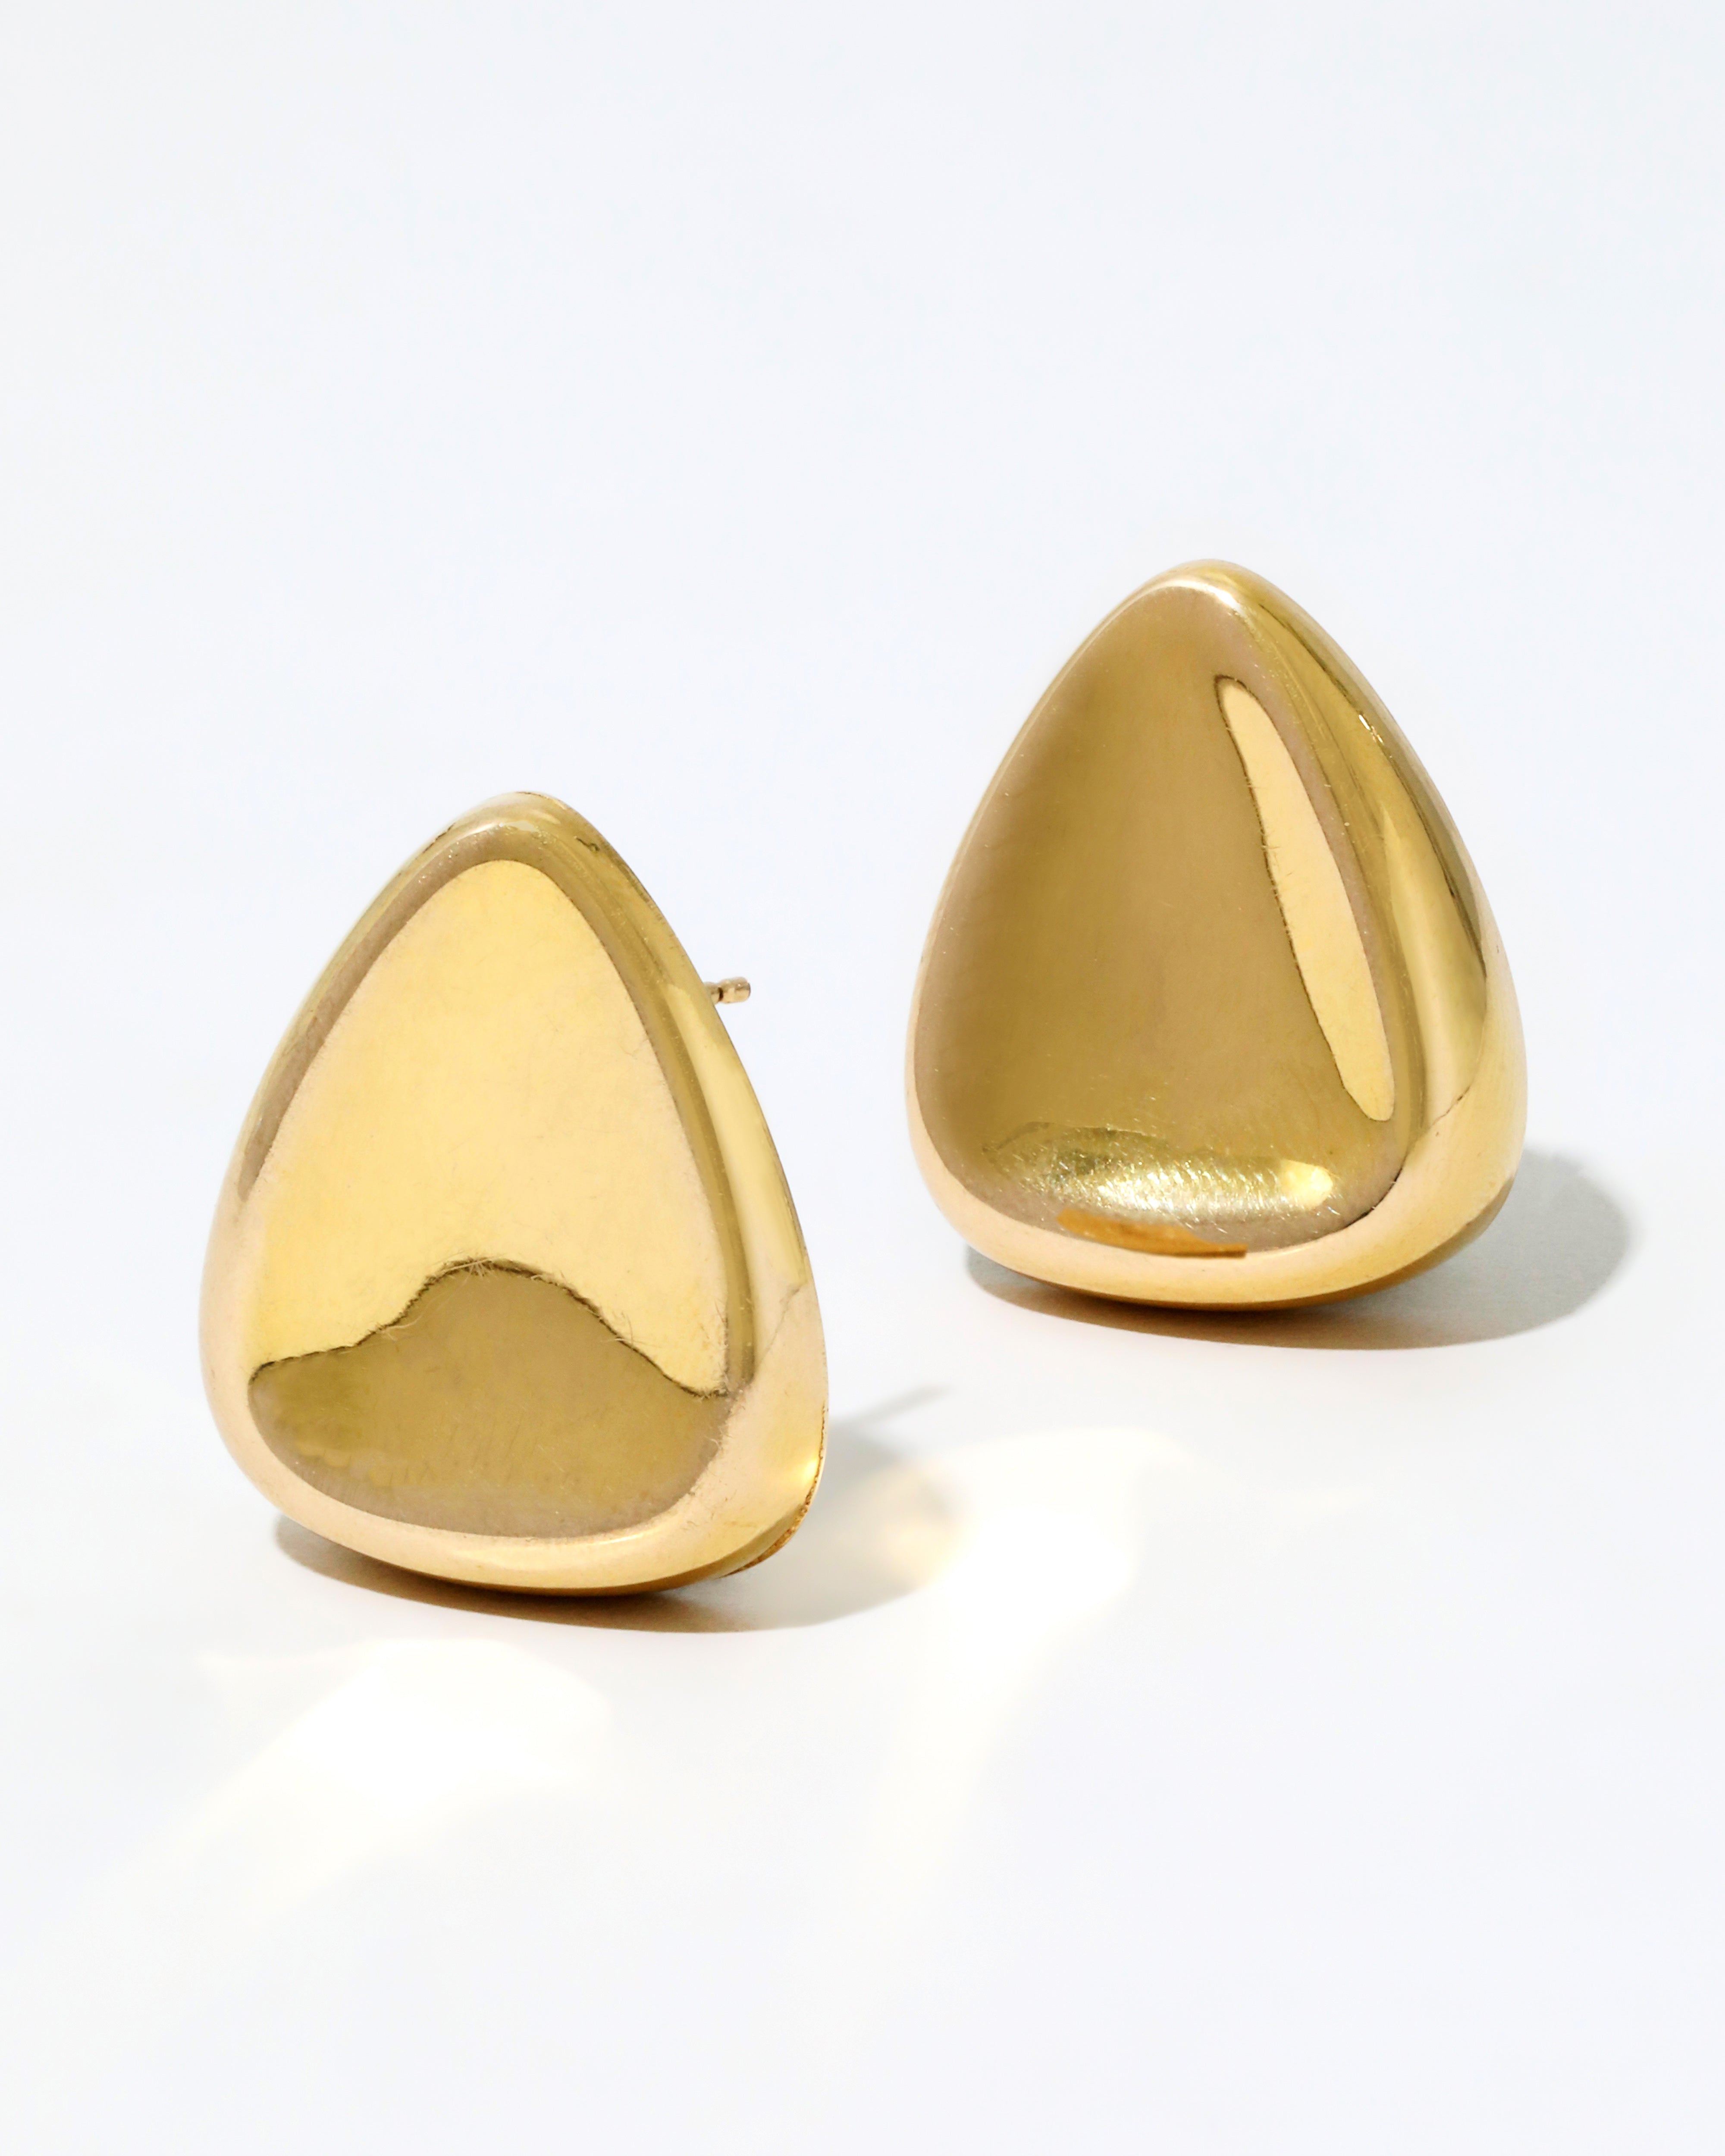 Alexis Bittar Vintage 14K Gold Organic Triangular Post Earrings | Statement Jewelry from Alexis Bittar